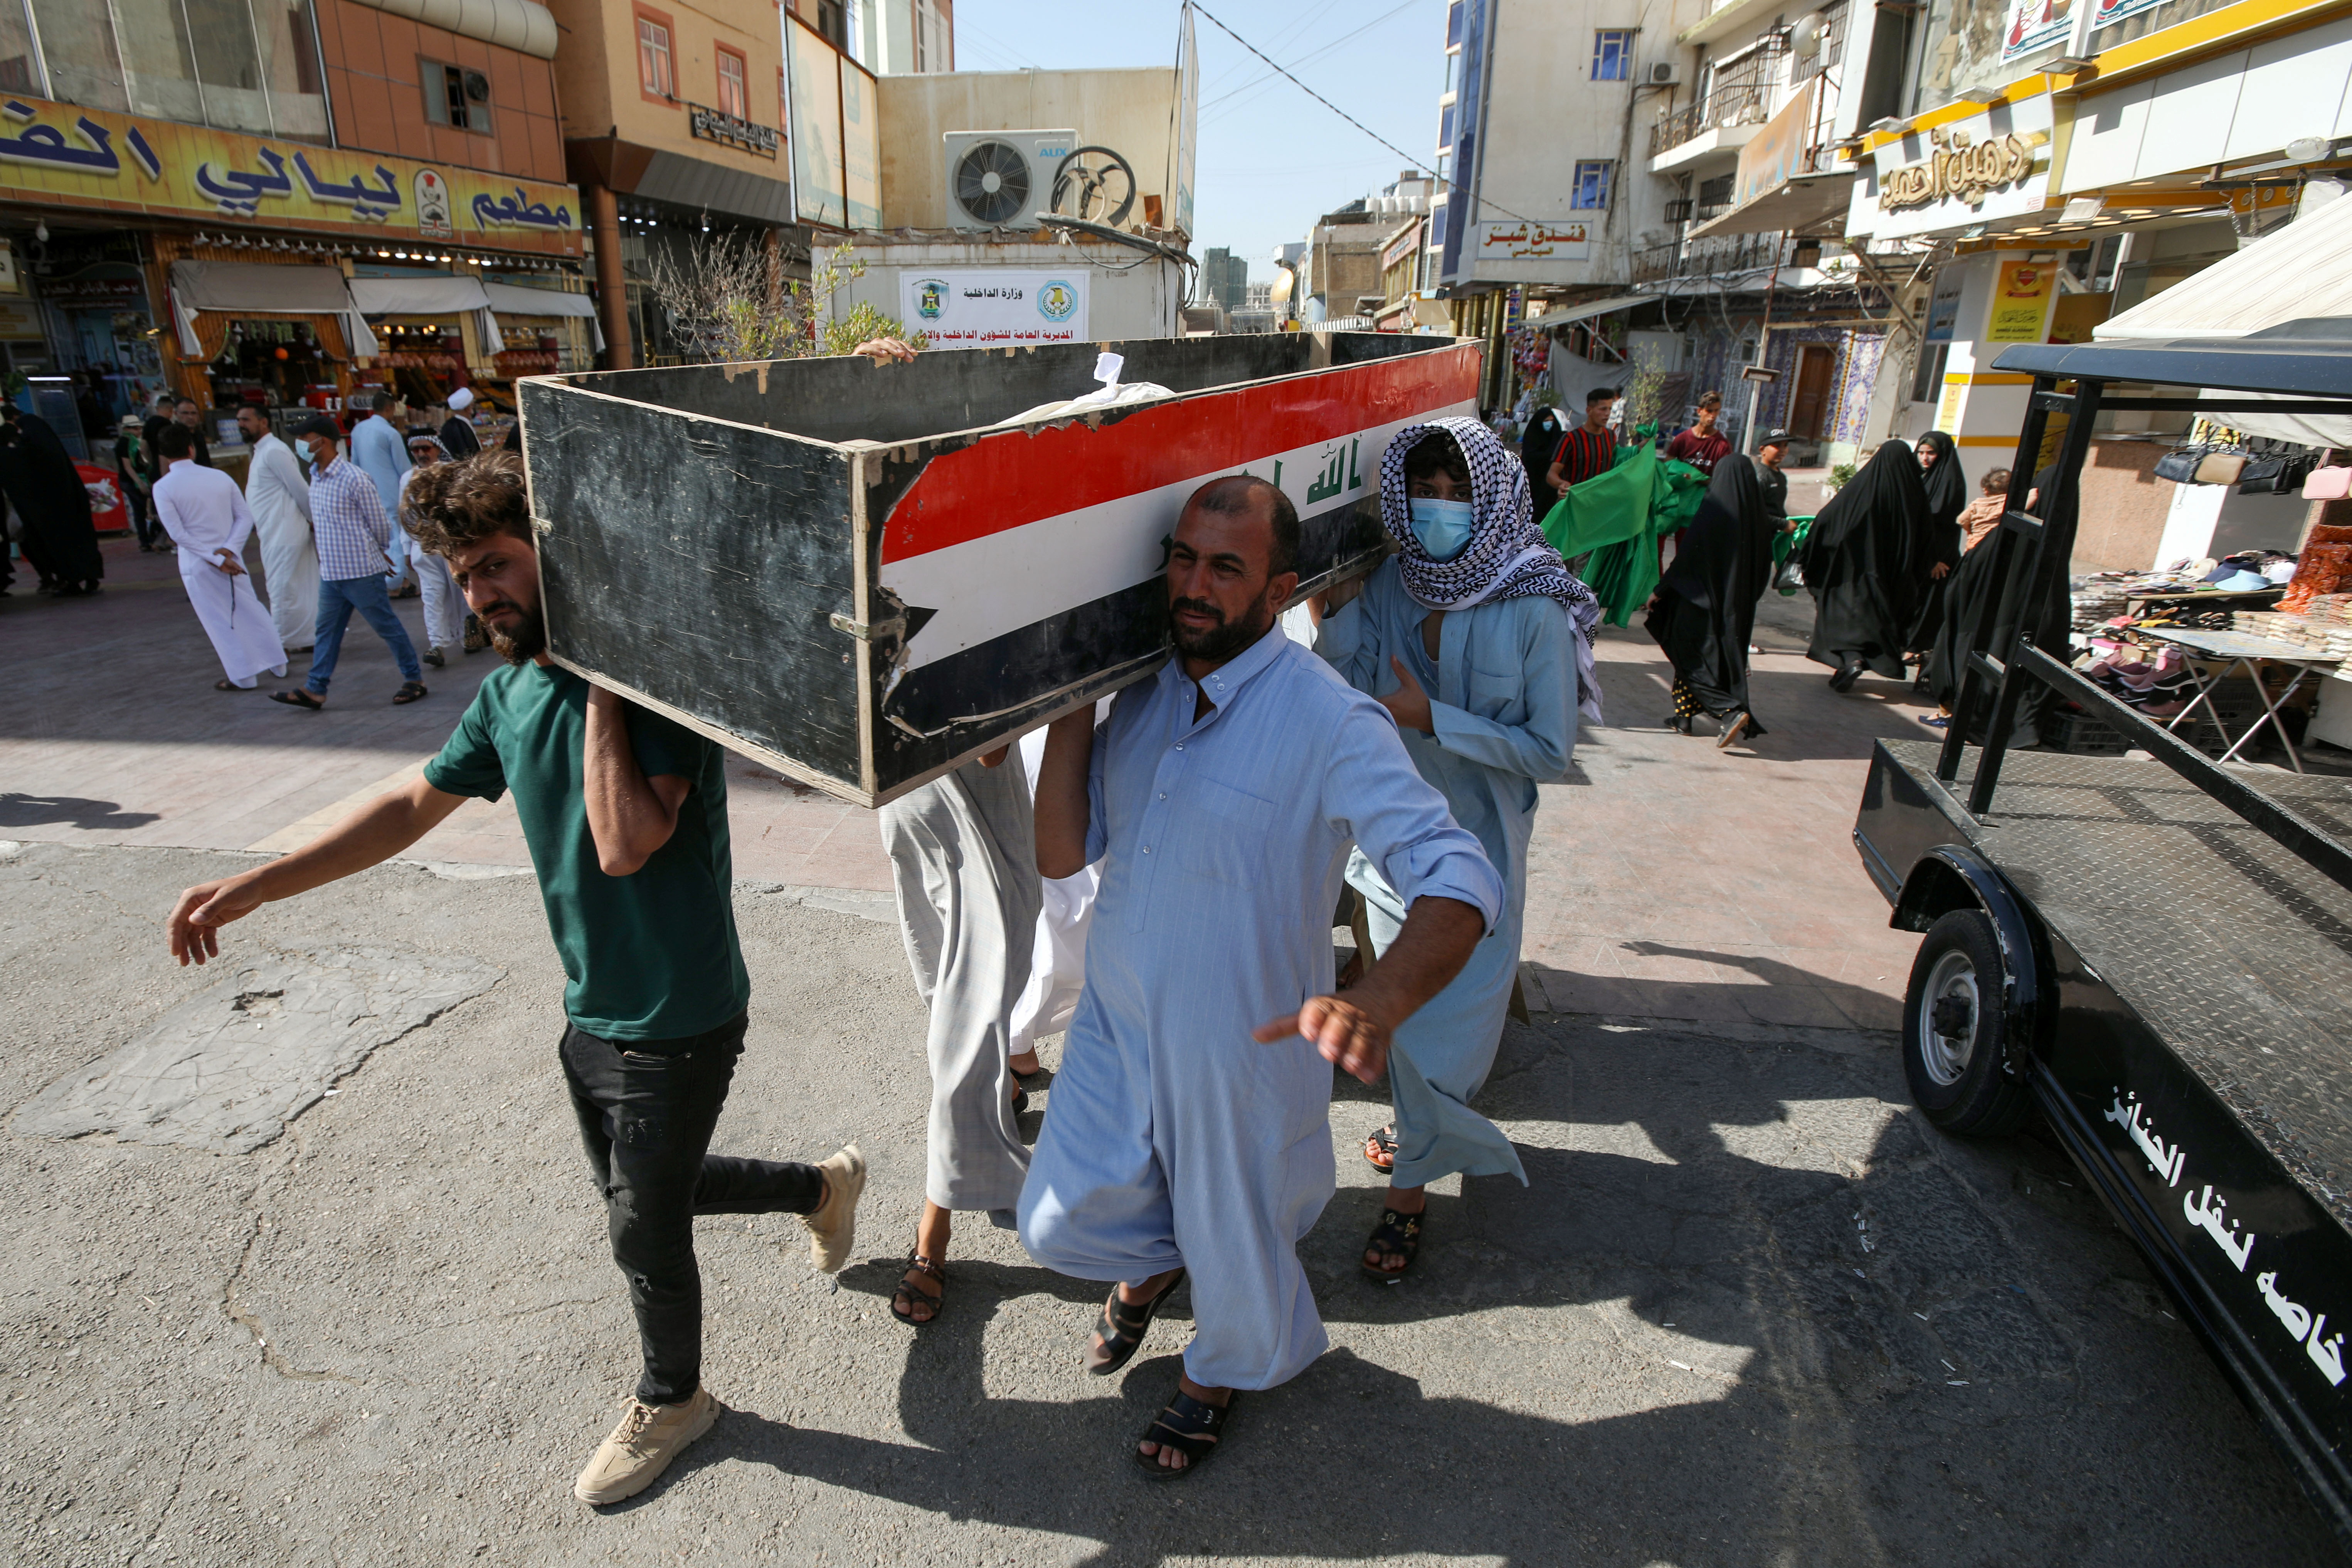 Mourners carry the coffin of a victim, who was killed in a fire that broke out at al-Hussain coronavirus hospital in Nassiriya, during a funeral in Najaf, Iraq, July 13, 2021. REUTERS/Alaa Al-Marjani